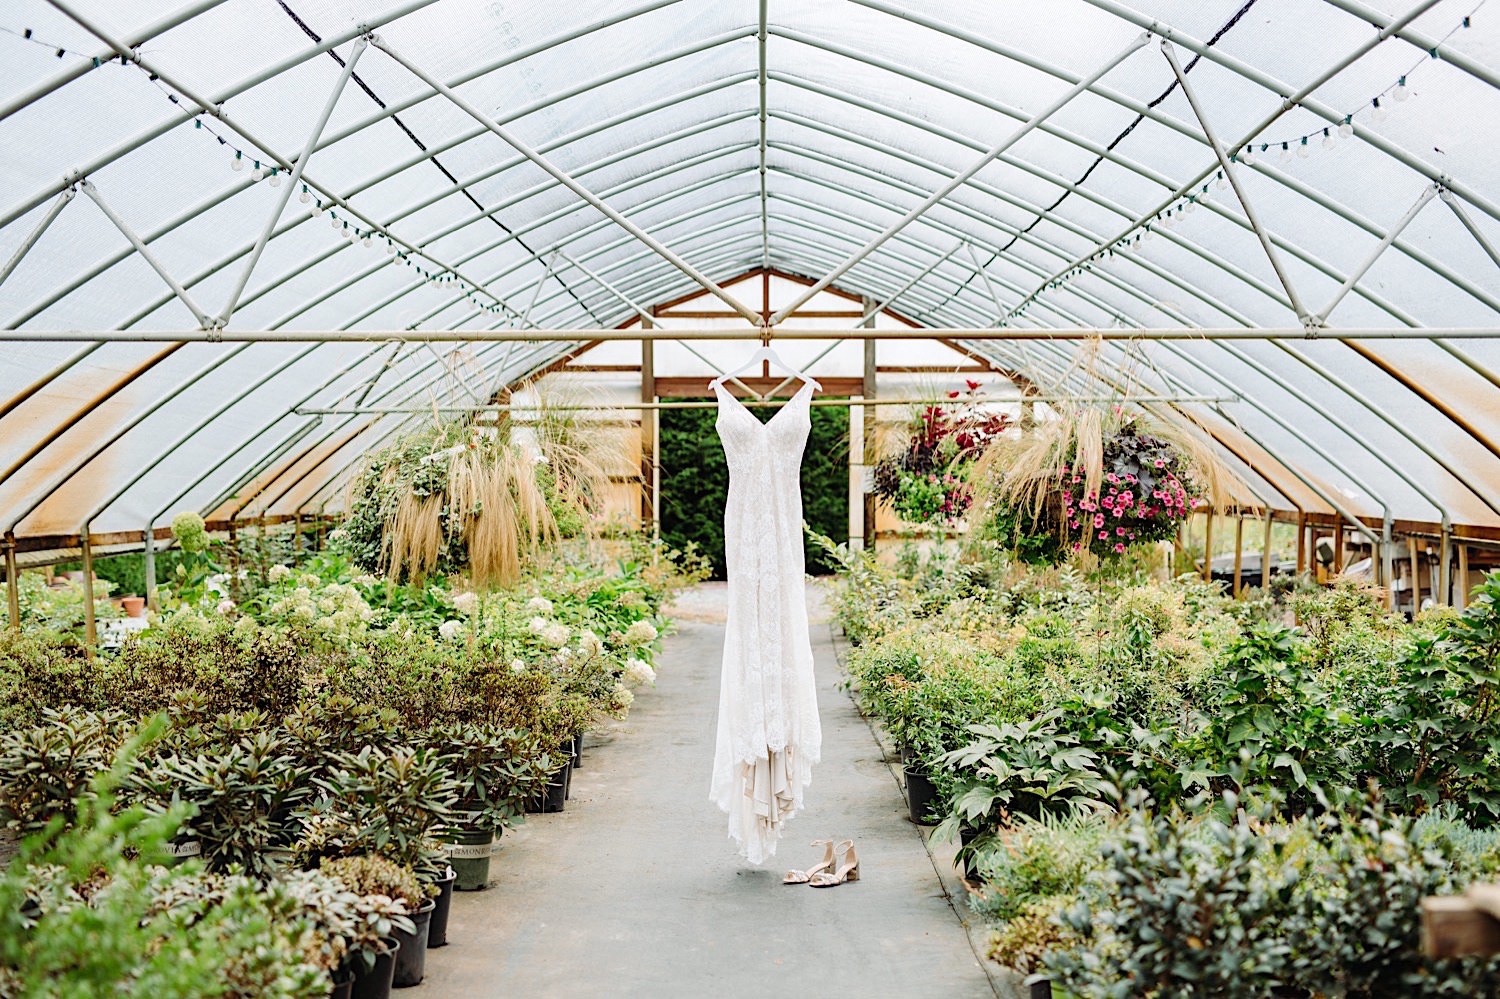 wedding dress hanging in a greenhouse at Pine Creek Farms and Nursery.